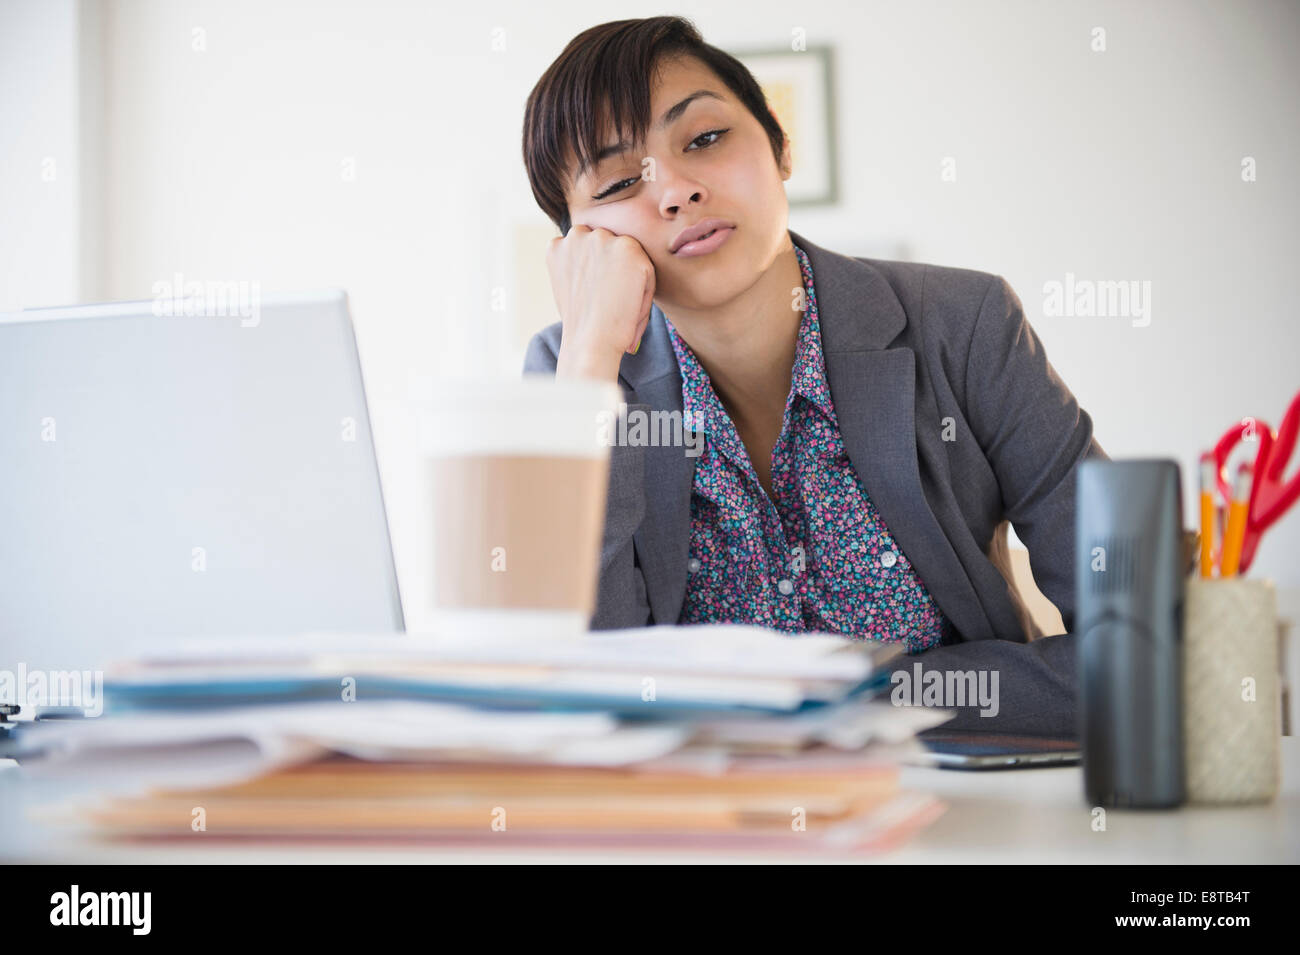 Bored mixed race businesswoman sitting at office desk Stock Photo